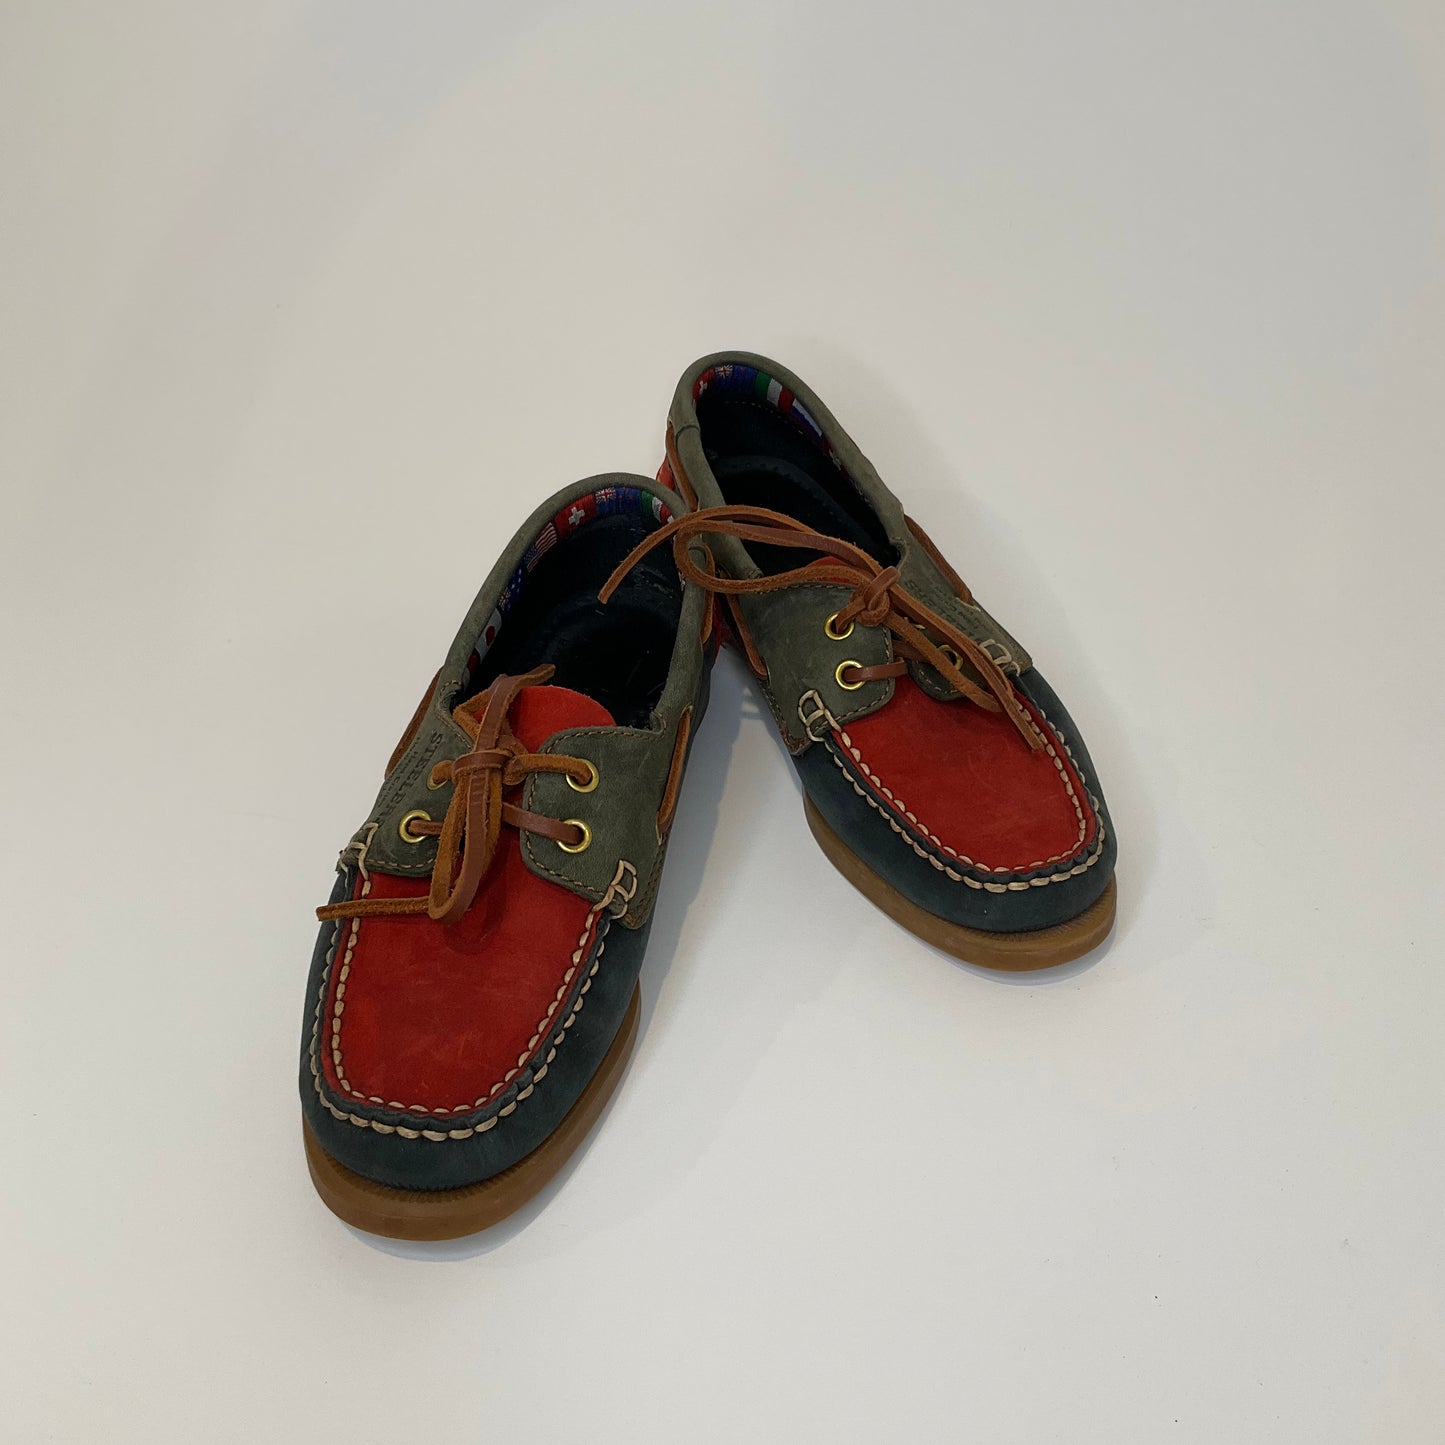 Steelers - Boat Shoes - Size 5.5